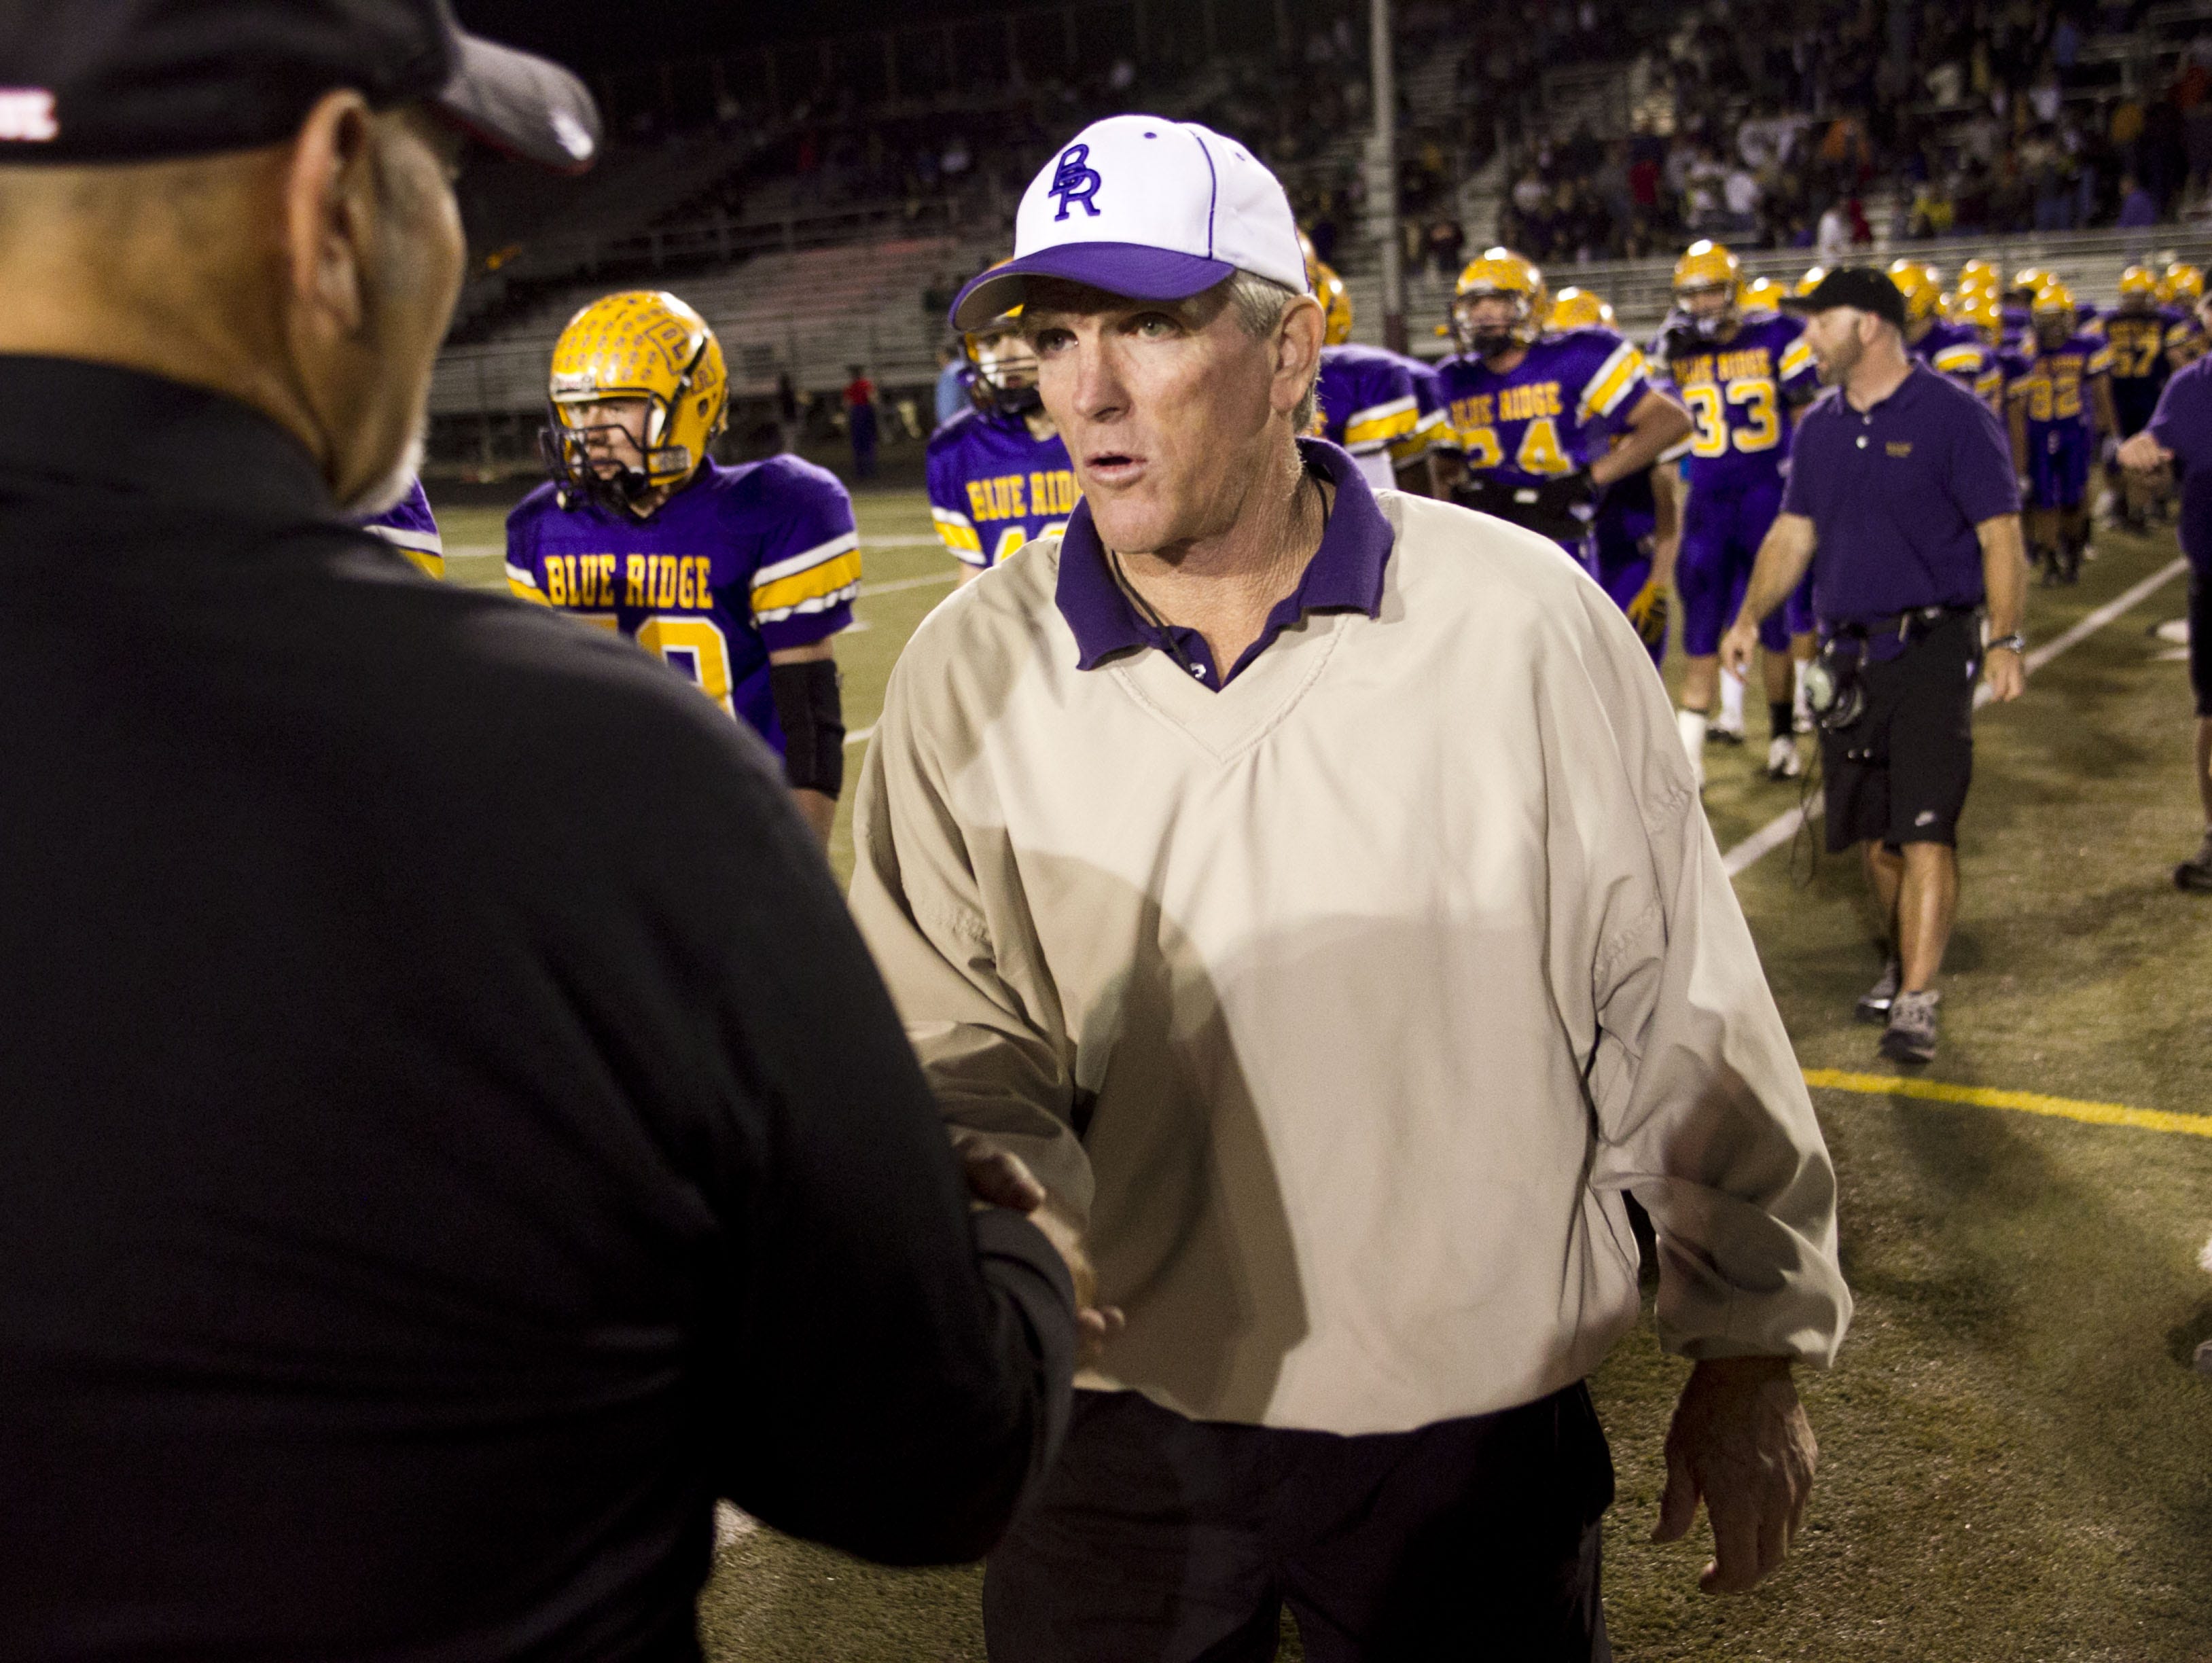 Lakeside Blue Ridge High head coach Paul Moro (center) shakes the hand of Florence High head coach George De la Torre after the Class 3A state high school football semifinals at Paradise Valley High School in Phoenix on November 20, 2010.